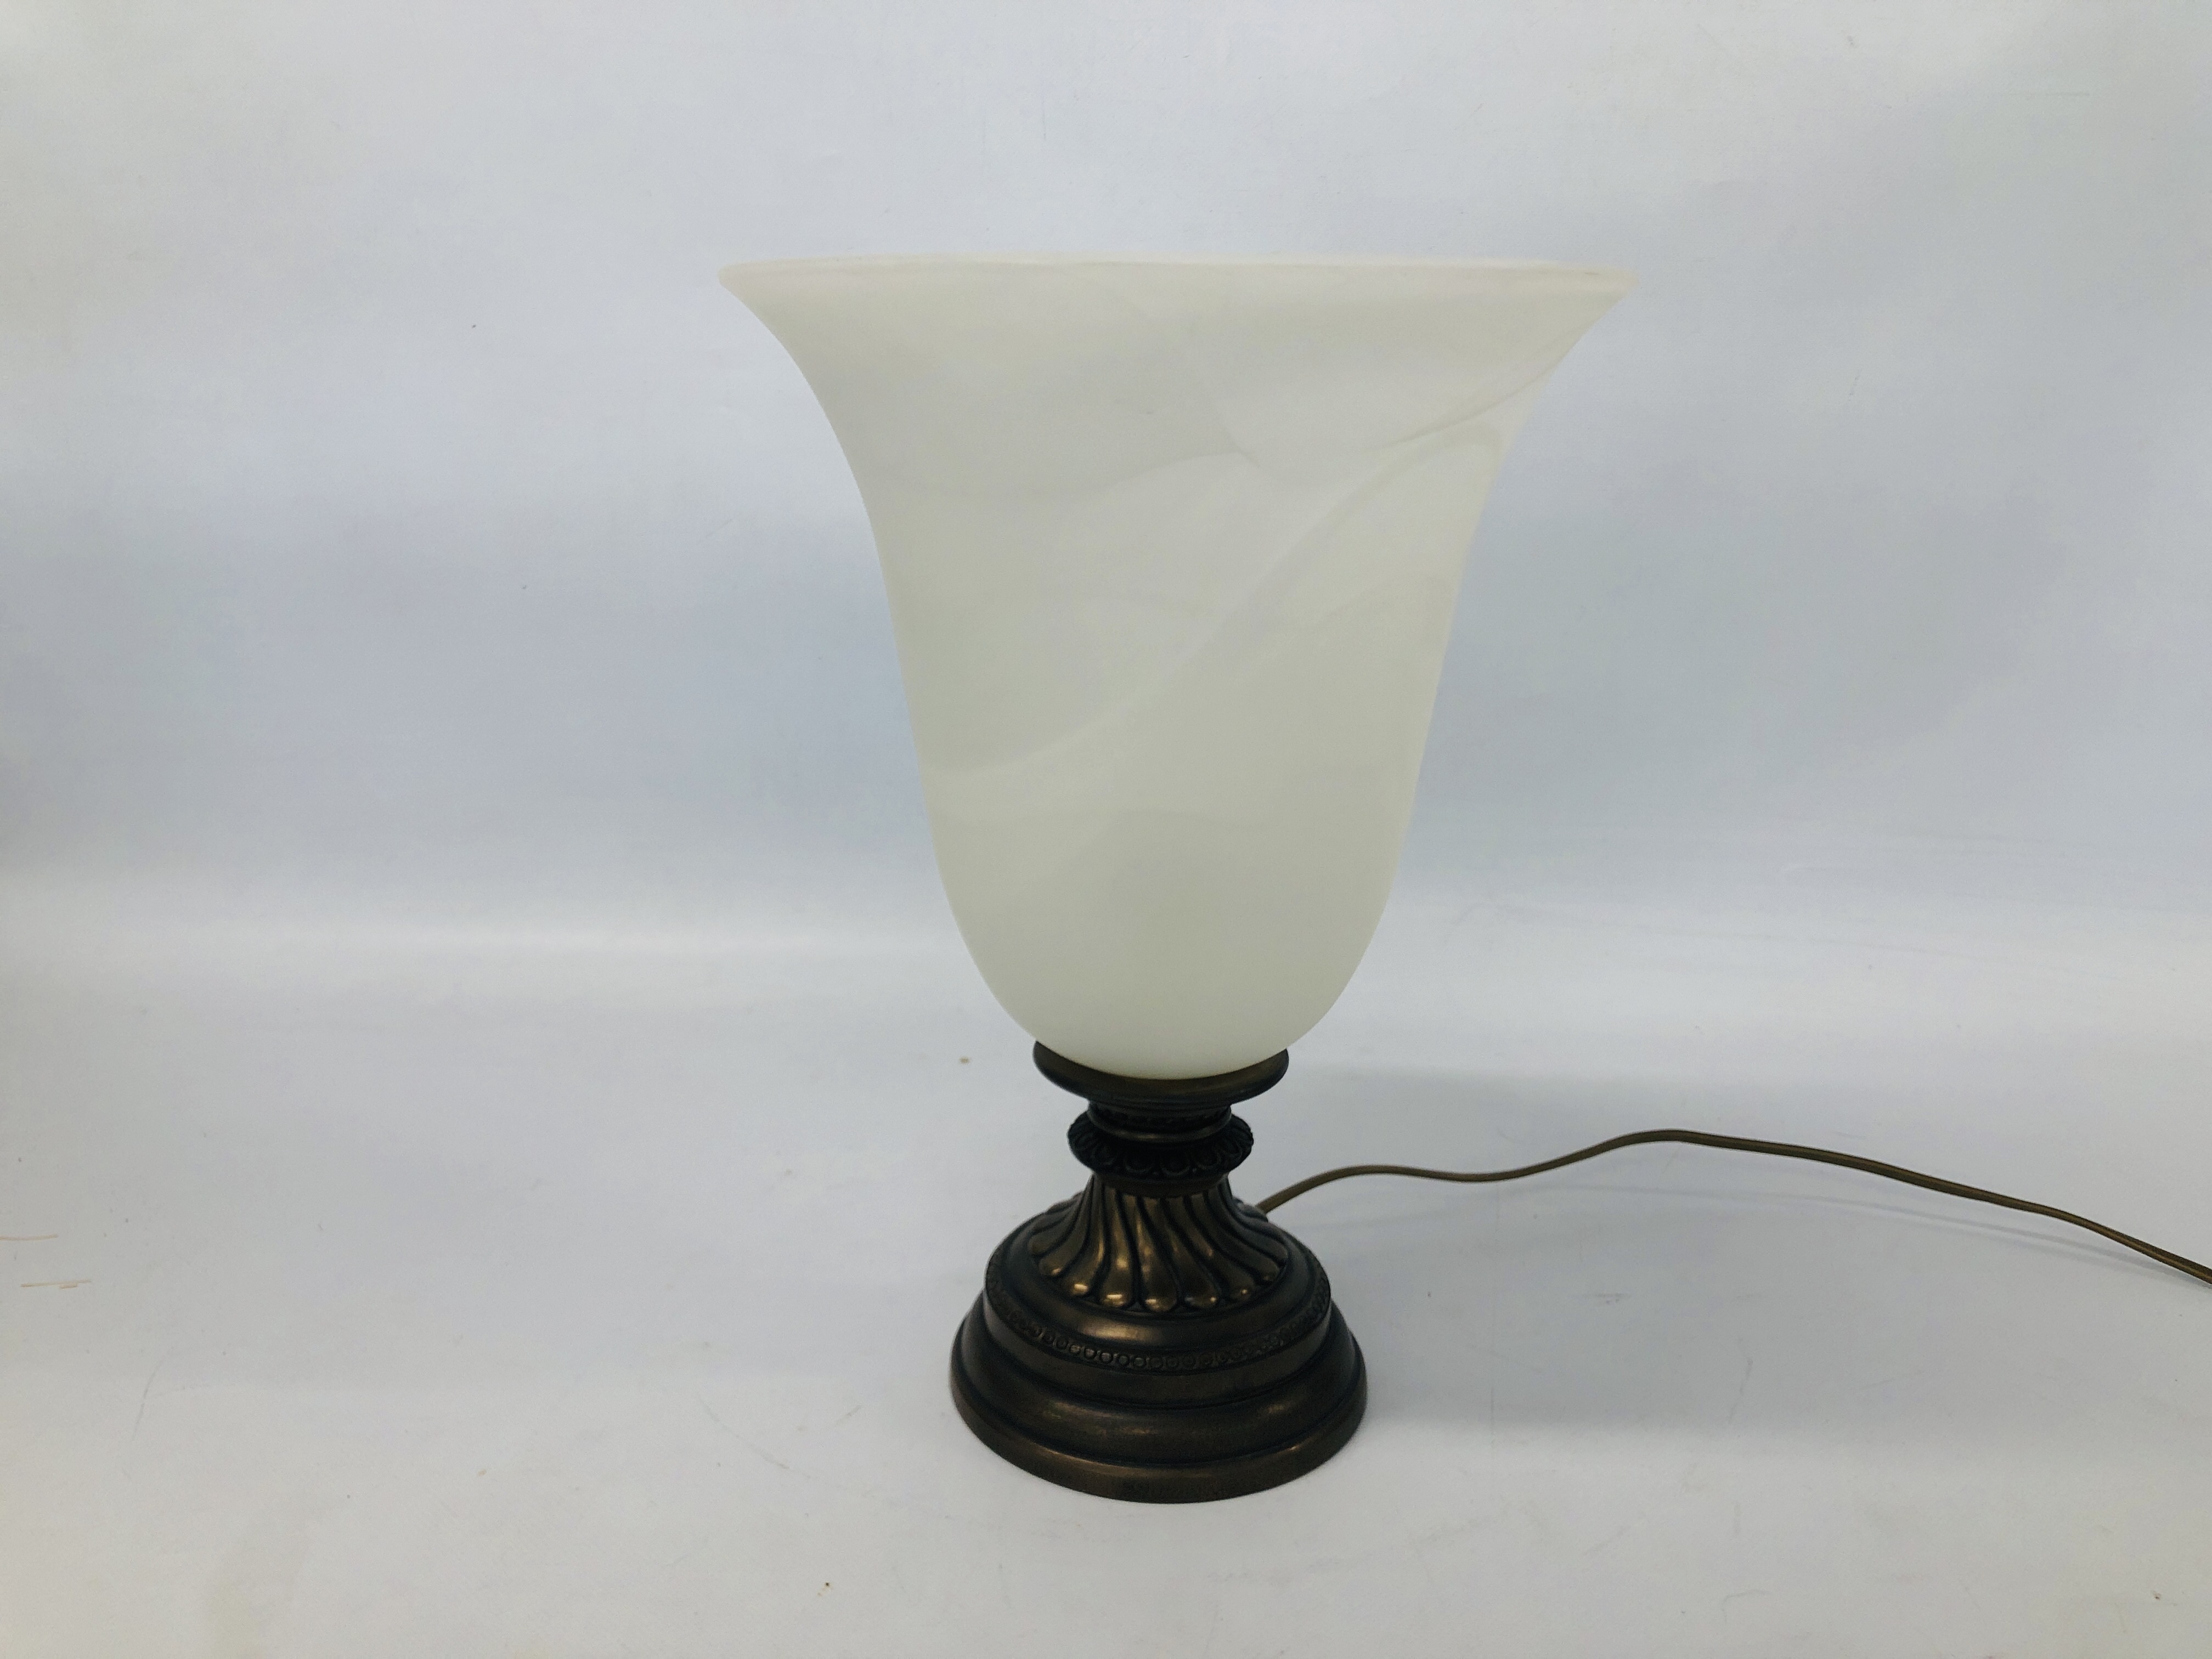 DAVID HUNT DESIGNER TABLE LAMP WITH OPAQUE GLASS SHADE H 34.5CM - SOLD AS SEEN.